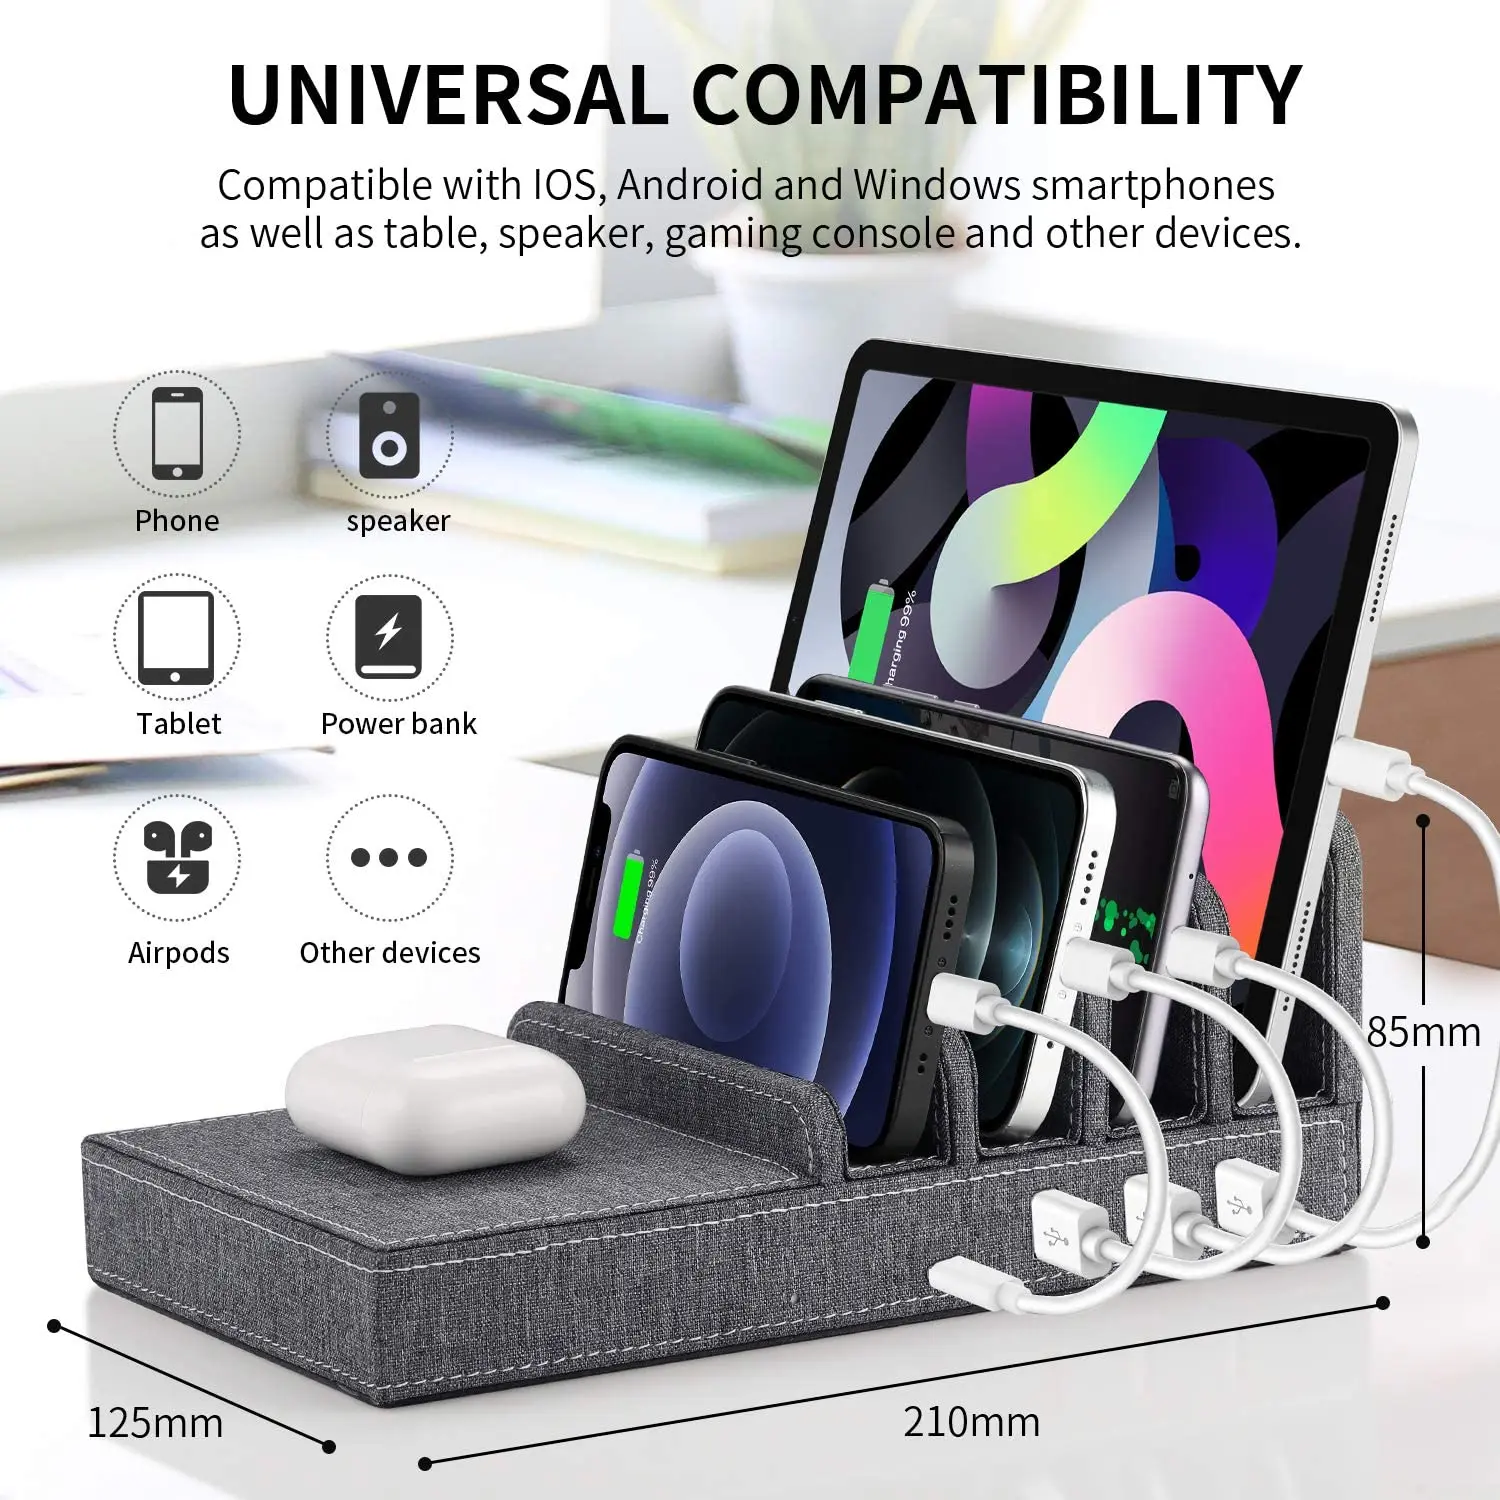 

Lecone 5 in 1 Wireless Charging Dock Station for Multiple Devices with PD QC Fast Charging Port & 2 USB Ports for Smartphones